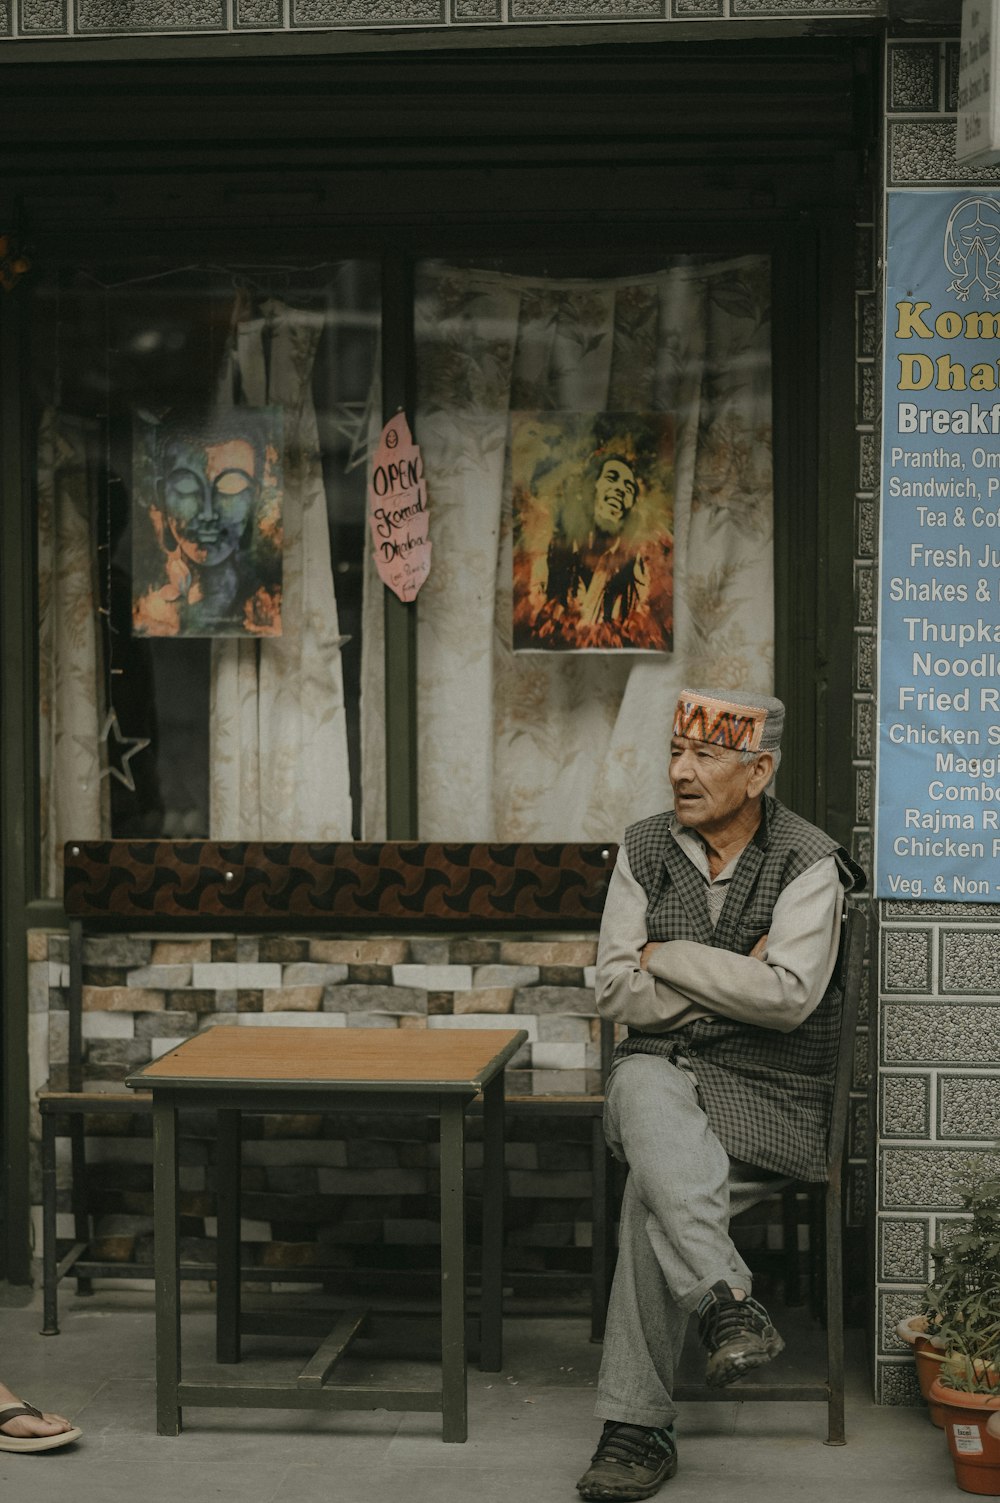 a man sitting on a bench in front of a restaurant